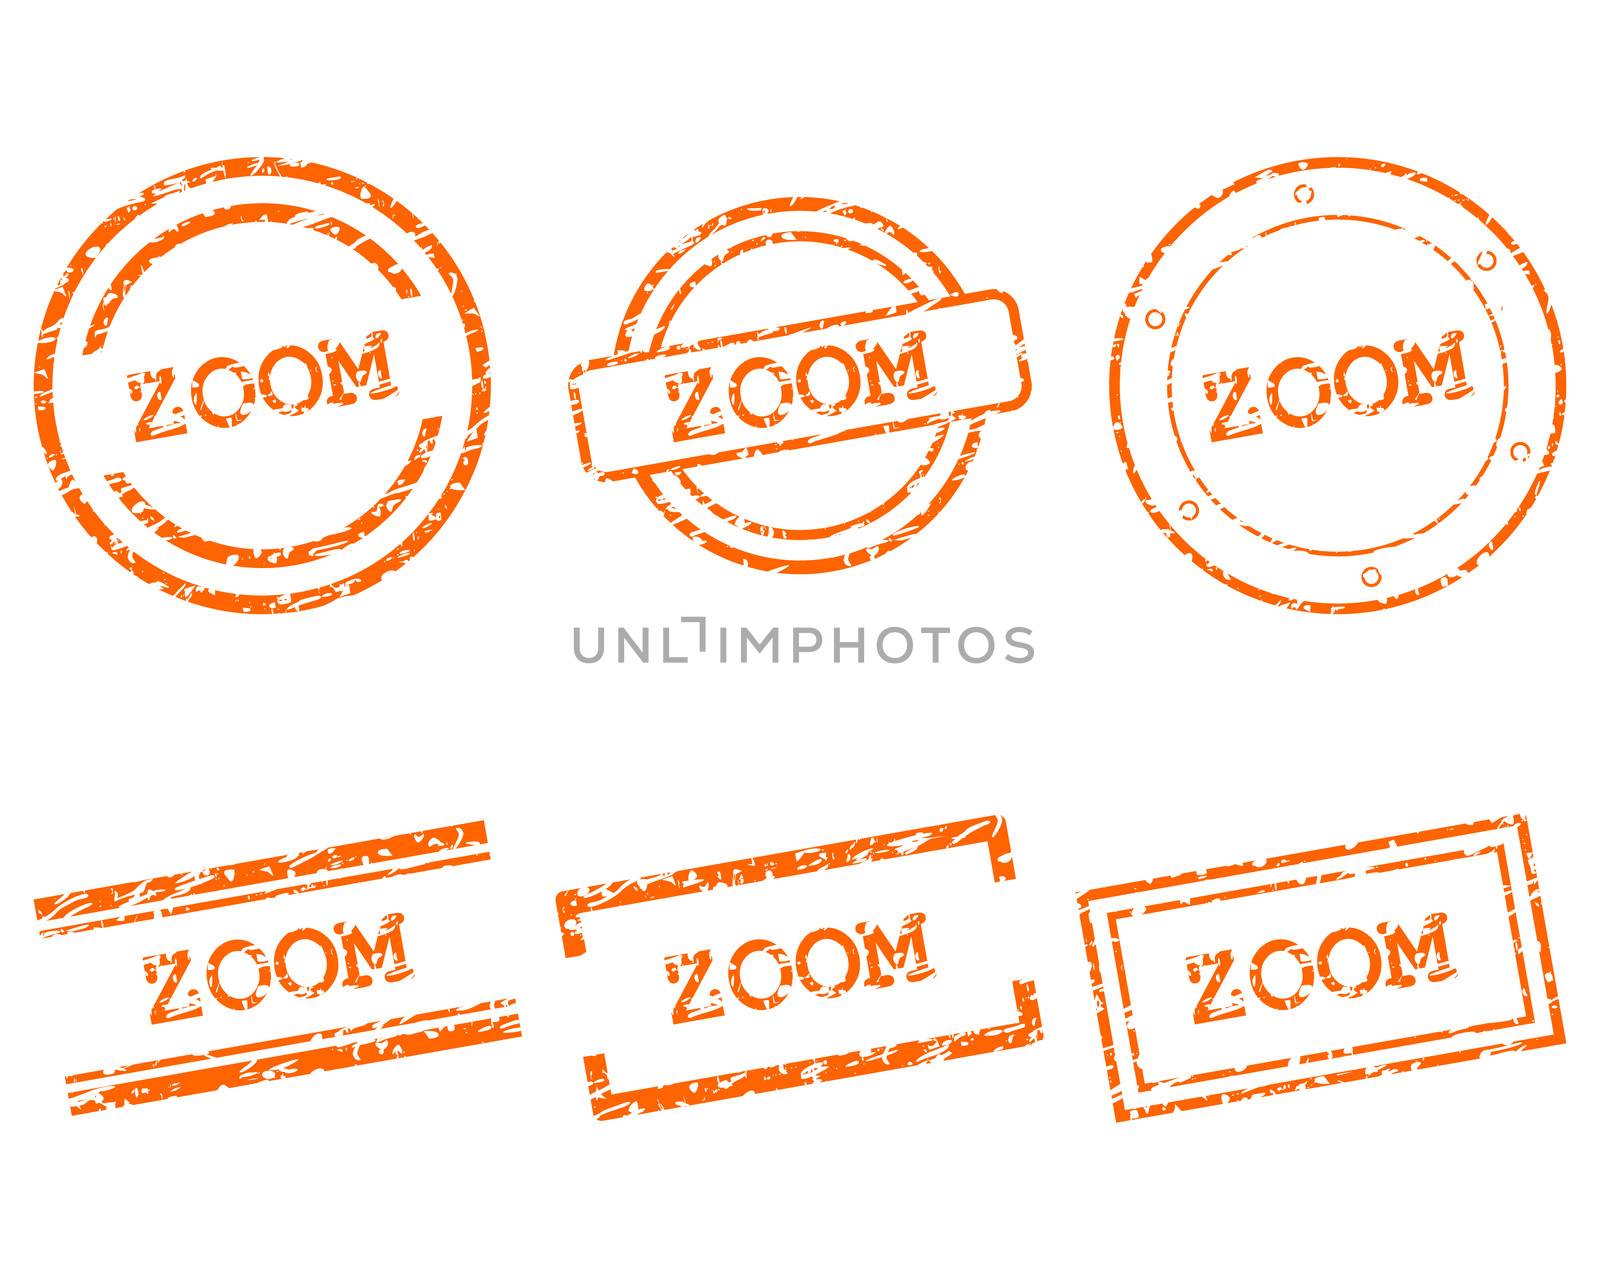 Zoom stamps by rbiedermann